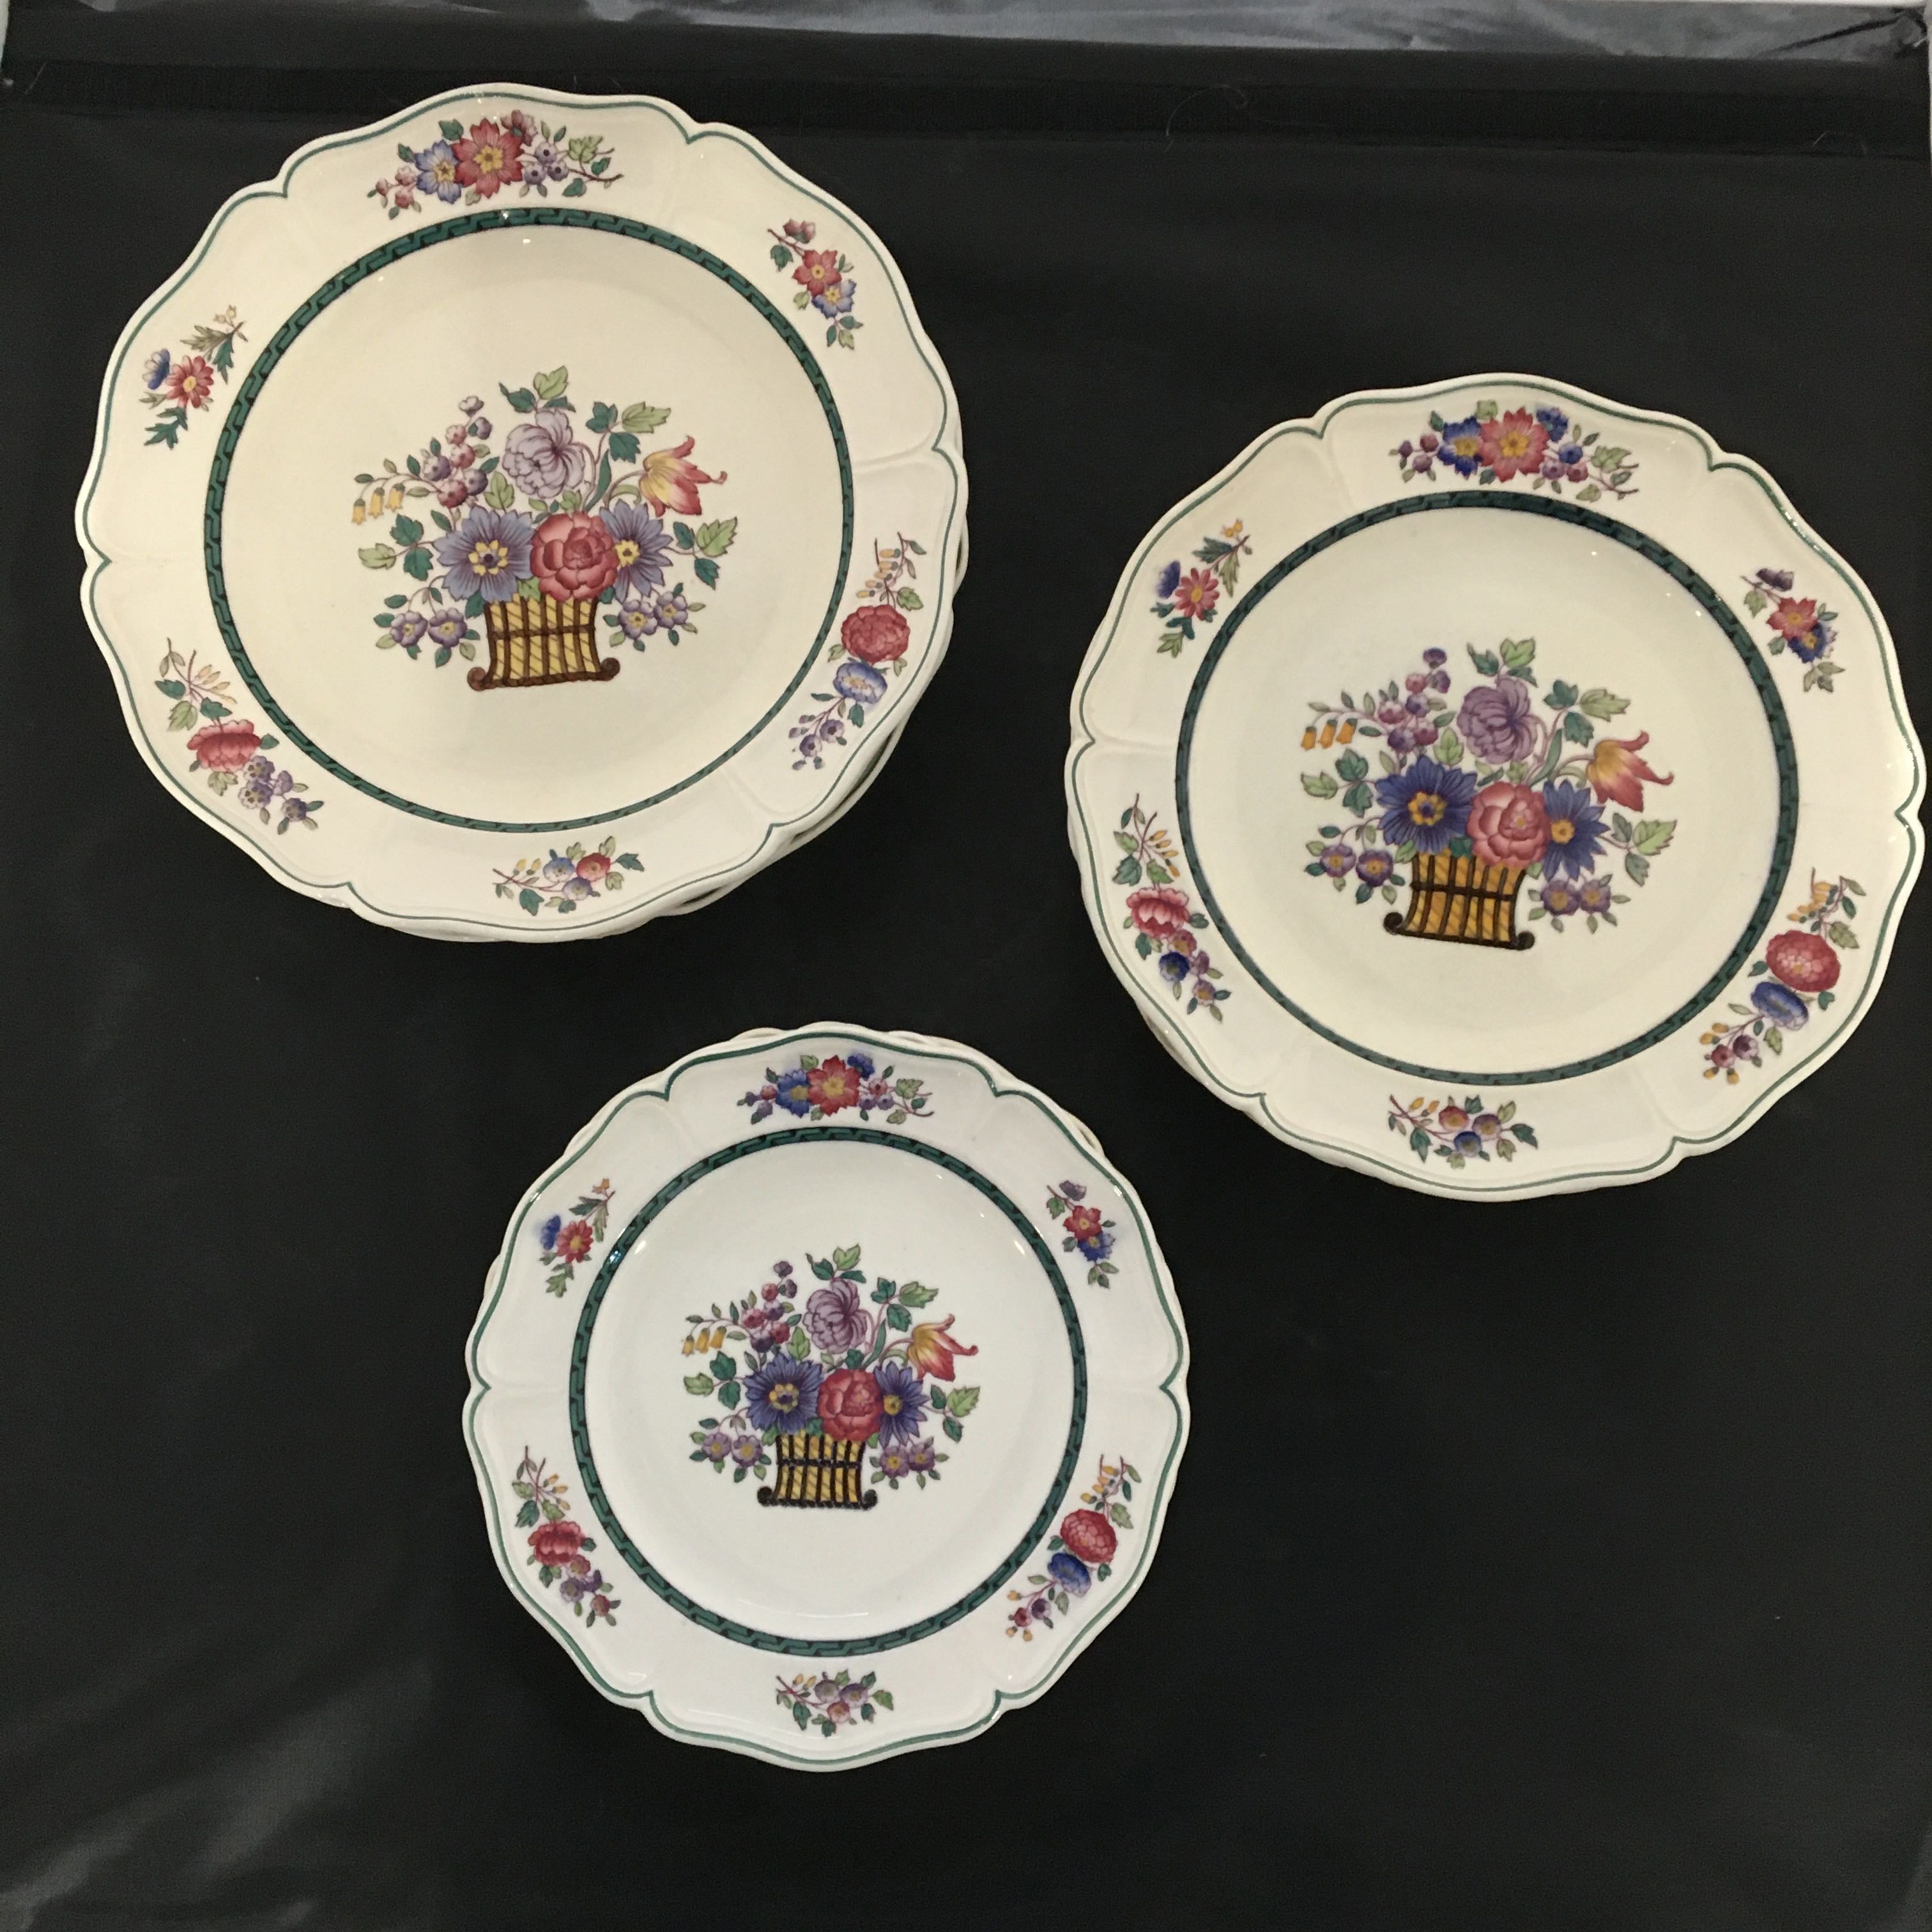 15 pc - Antique Wedgewood Floral Etruria China 1922